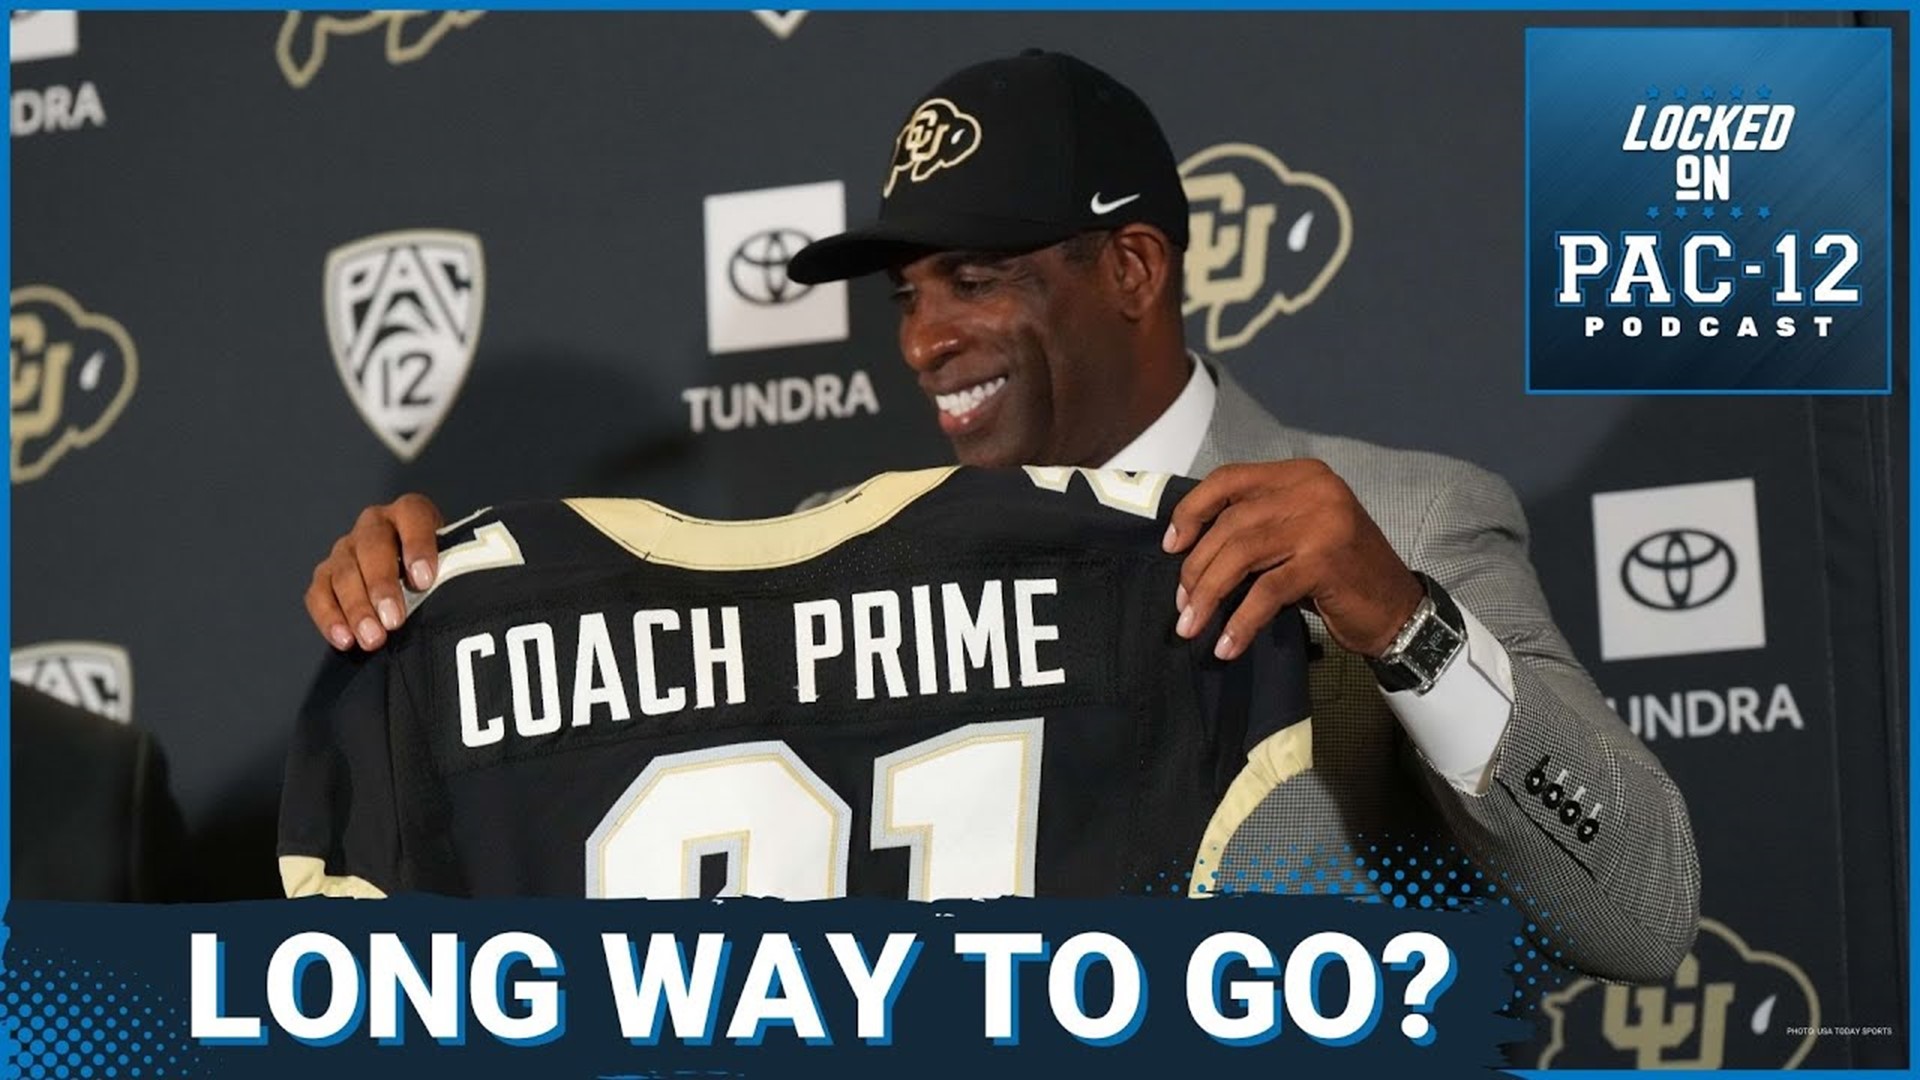 Deion Sanders has recalibrated expectations for Colorado Football now that he's the head coach, but the betting markets don't yet respect the Buffaloes.